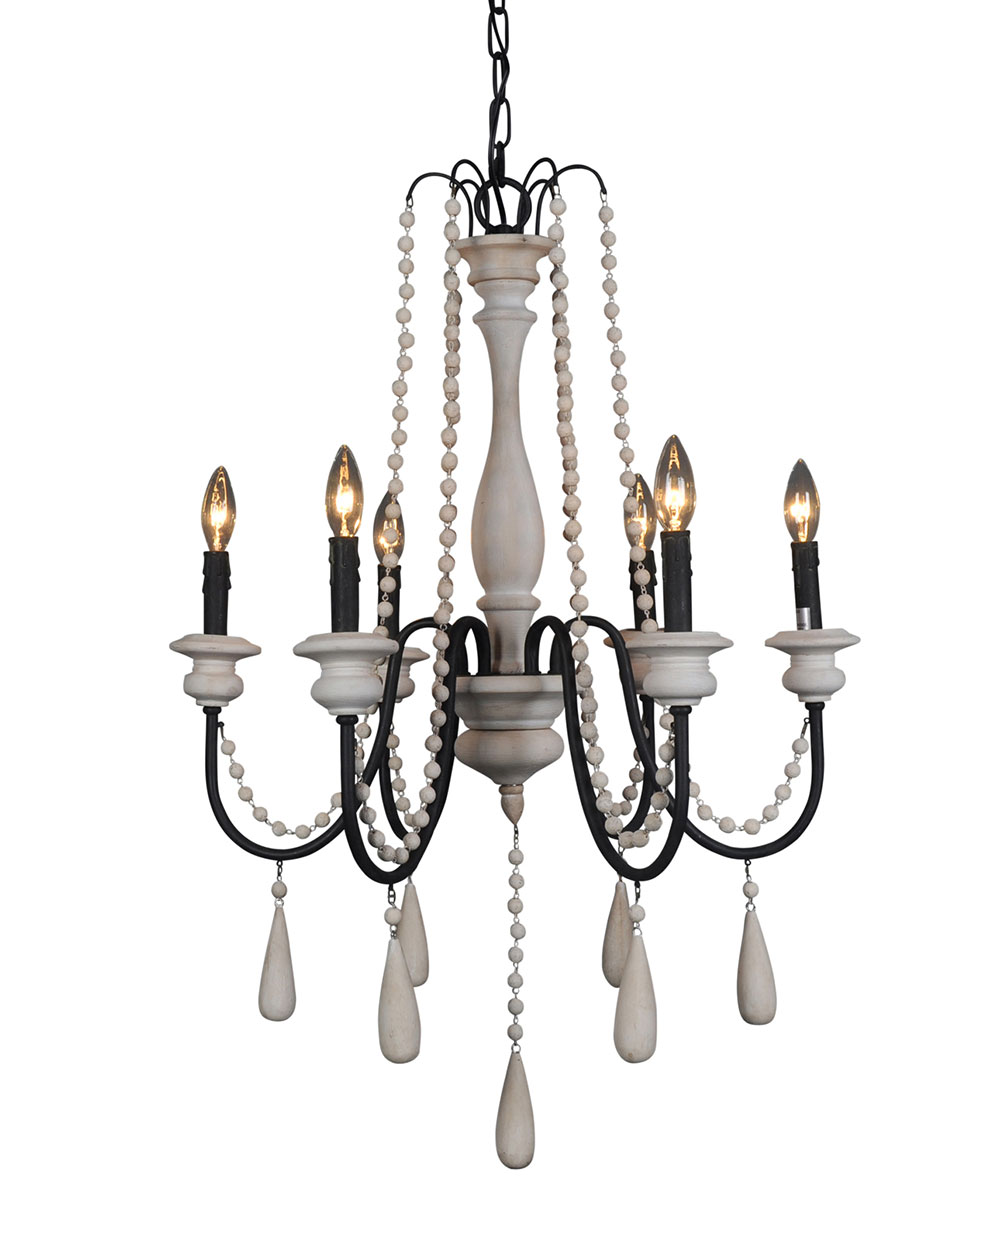 French Country Collections chandelier